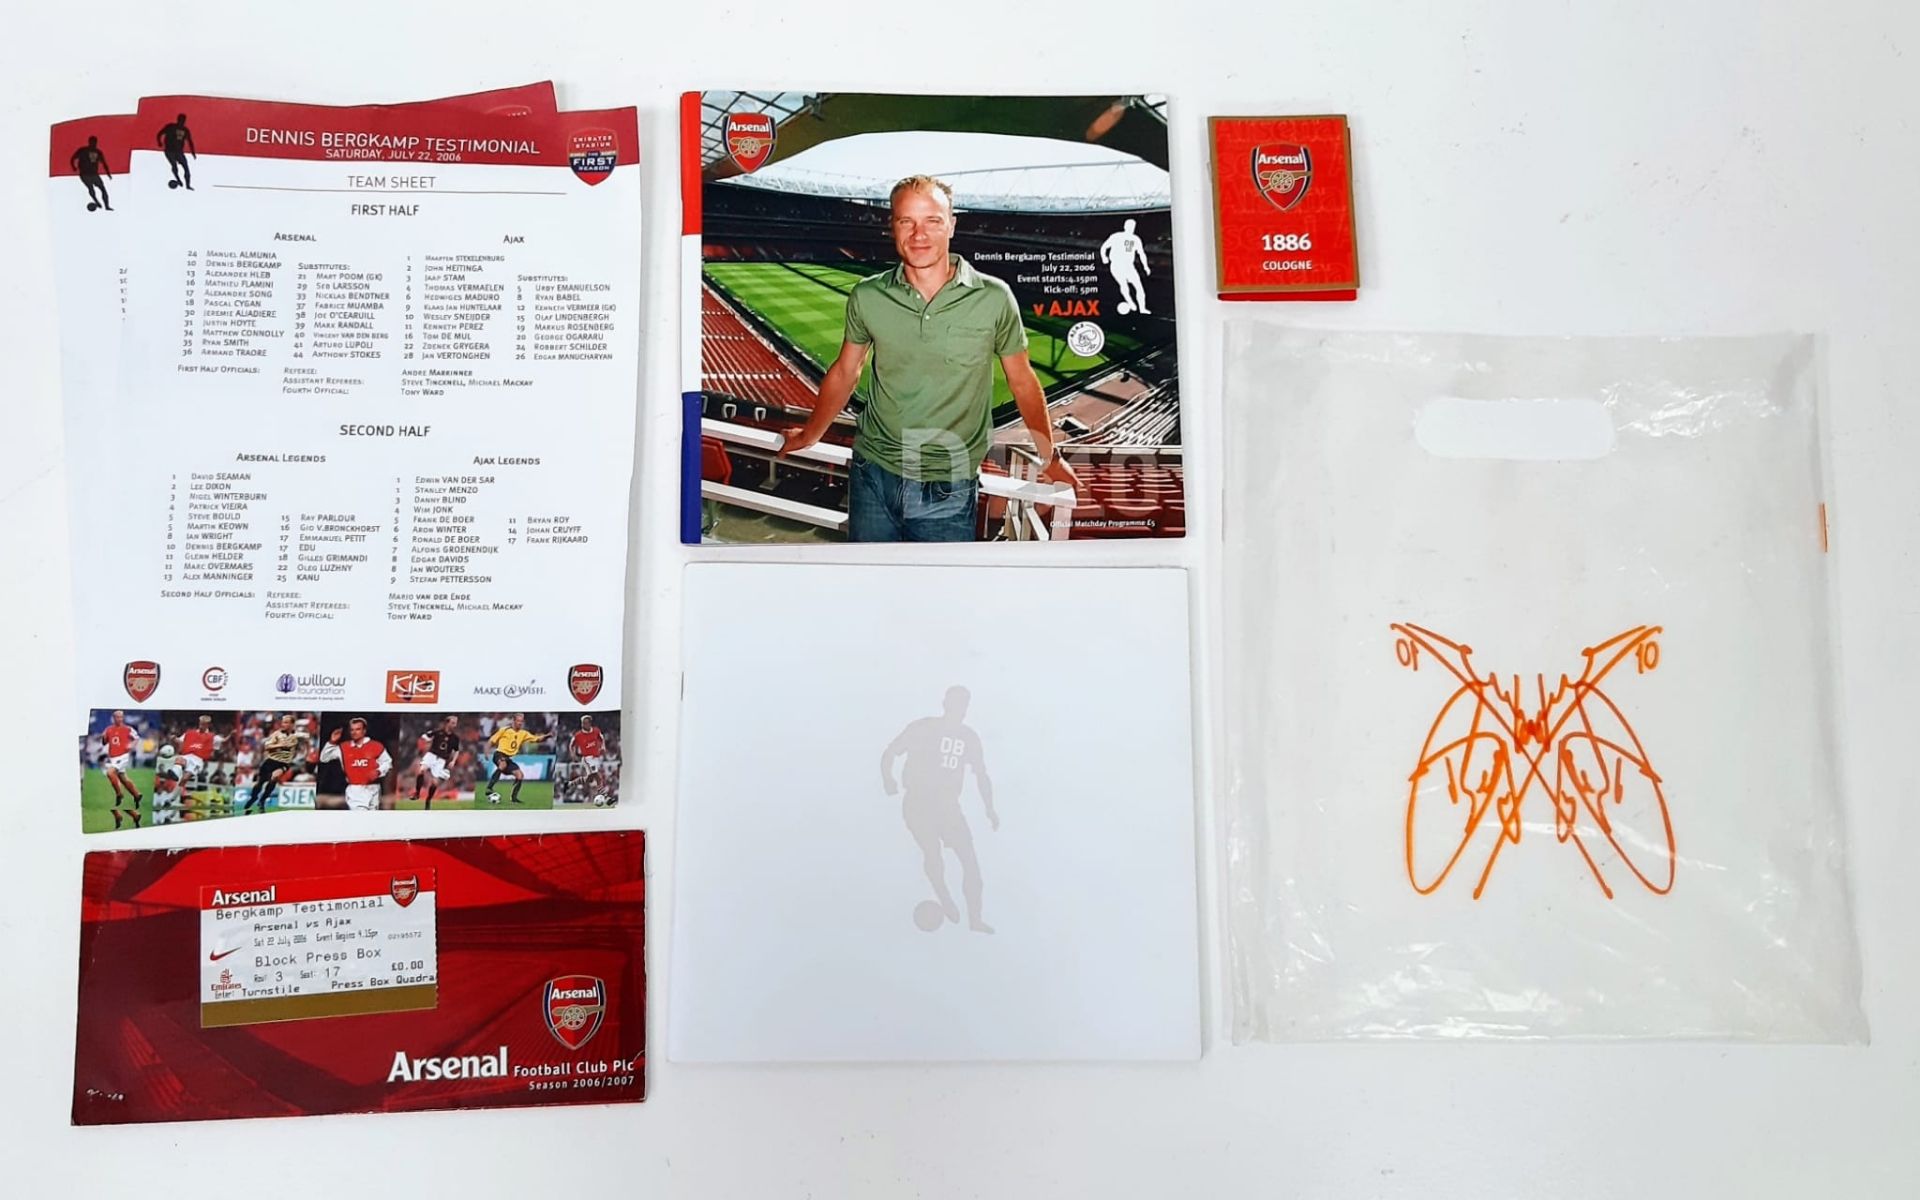 Gunners' hero Dennis Bergkamp's testimonial match package from July 22, 2006 - the first played at